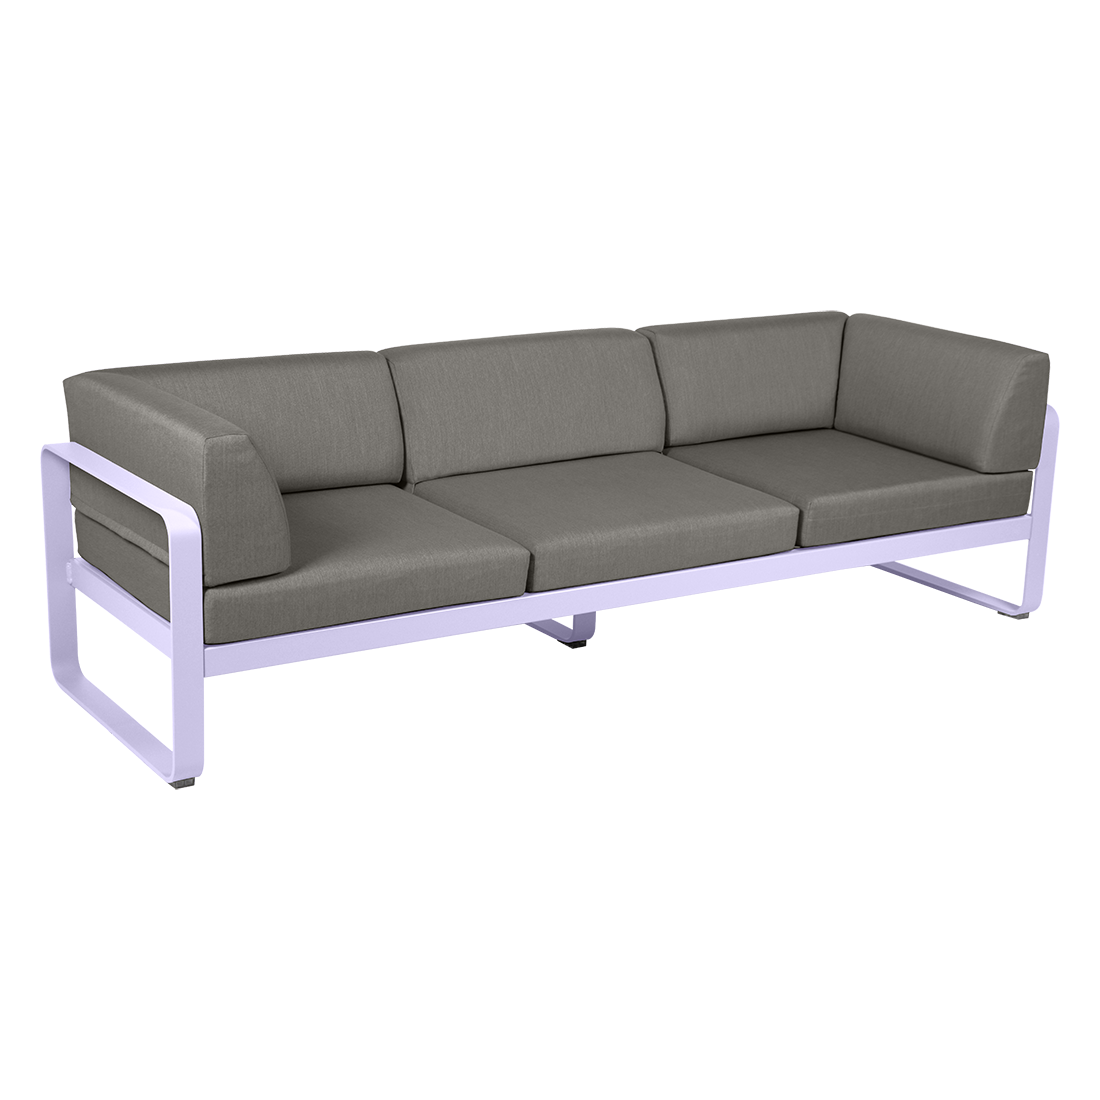 BELLEVIE garden sofa - 3-seater with side cushions